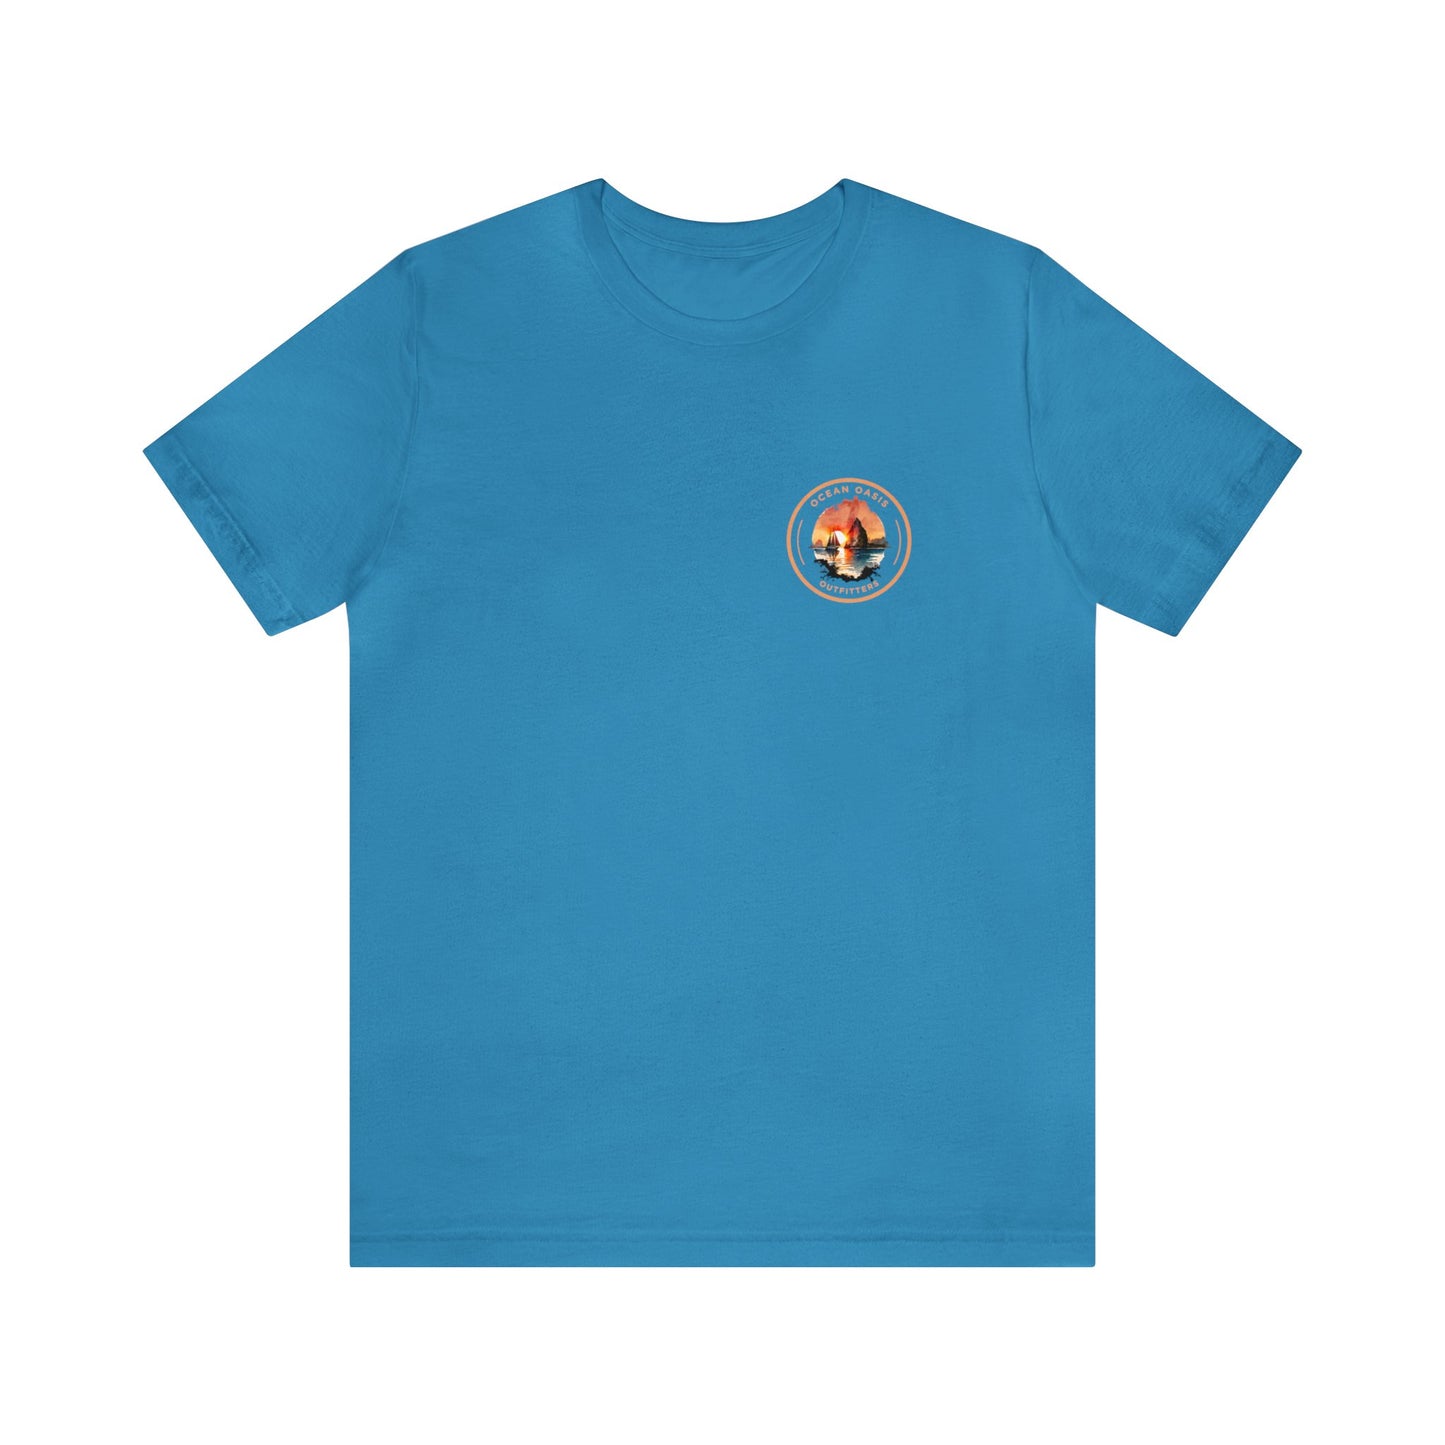 Seaside Serenity: Dive into Style with Ocean Oasis Outfitters Orange Logo Tee! Bella & Canvas T-Shirt